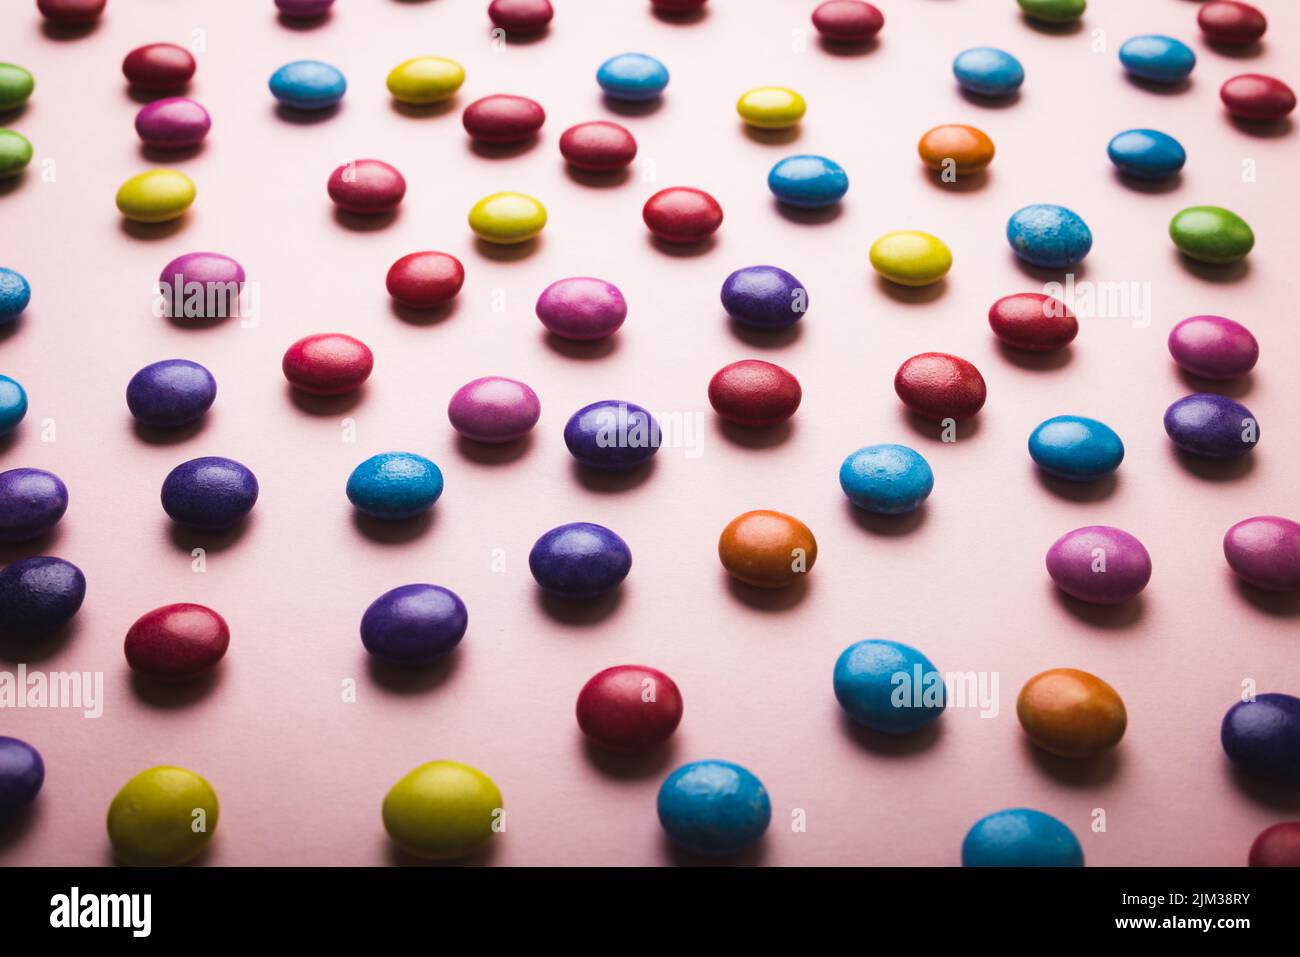 High angle full frame view of multi colored chocolate candies scattered on pink background. unaltered, unhealthy eating and sweet food concept. Stock Photo